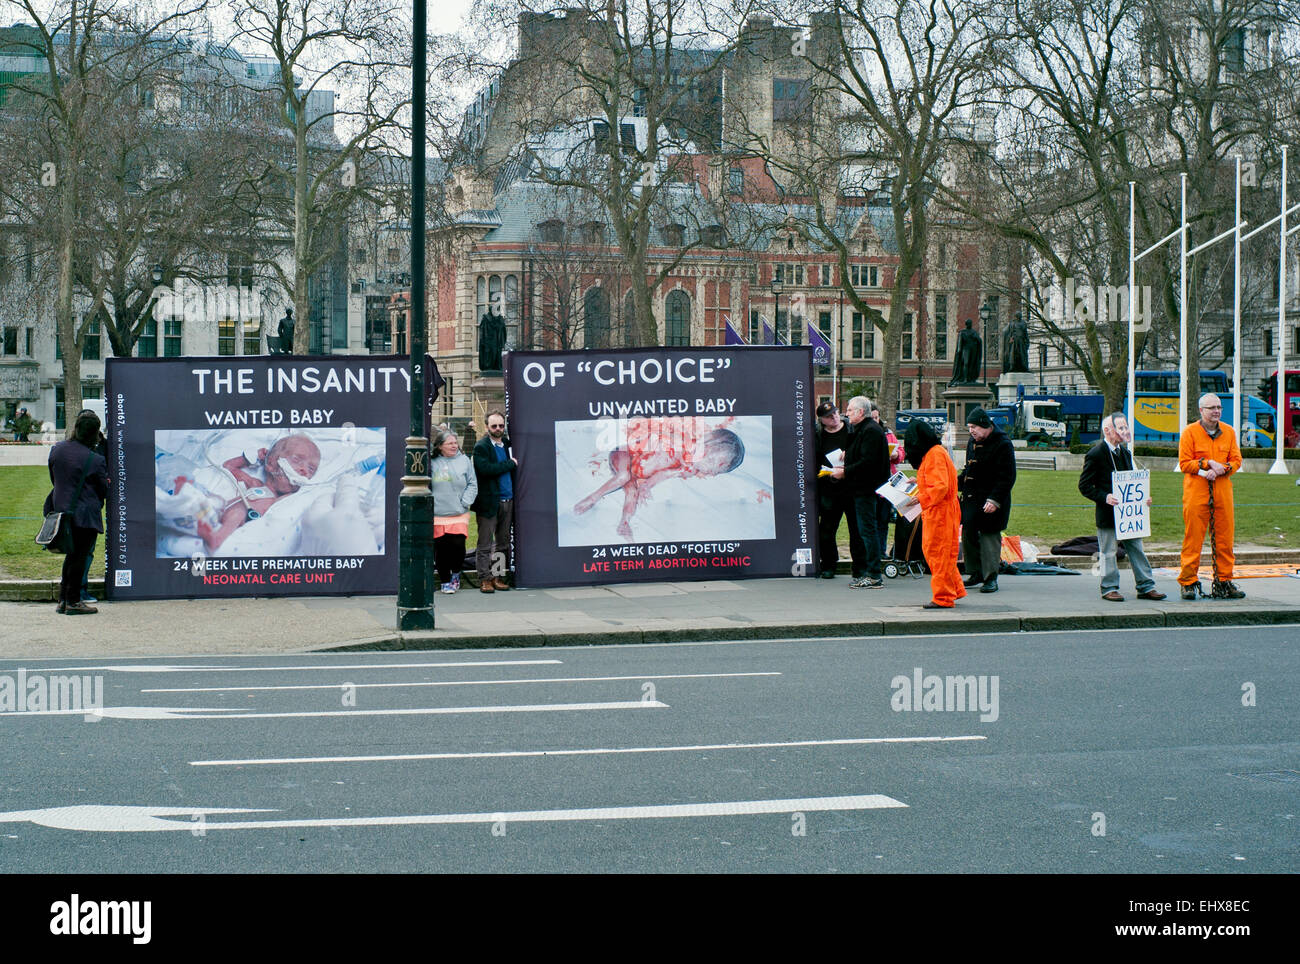 Anti abortion protesters Westminster London abort67 24 week premature baby and 24 week dead foetus Stock Photo